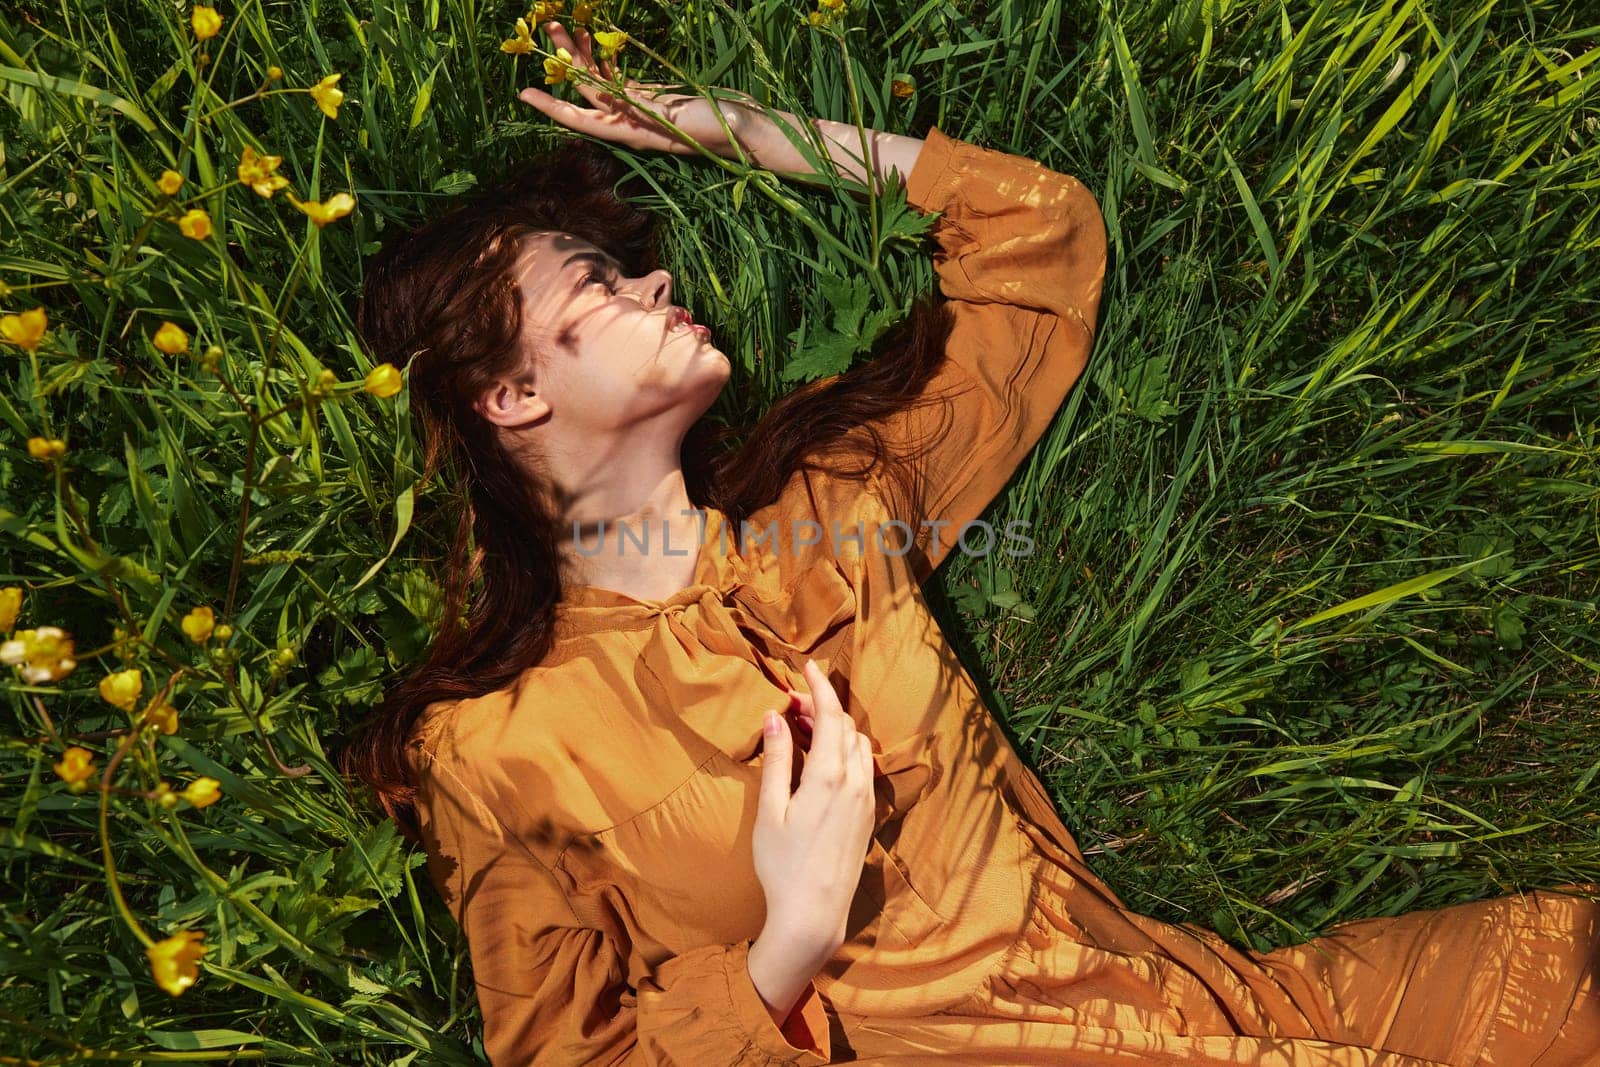 a calm woman with long red hair lies in a green field with yellow flowers, in an orange dress with her eyes closed, holding her hand near her face, enjoying peace and recuperating by Vichizh